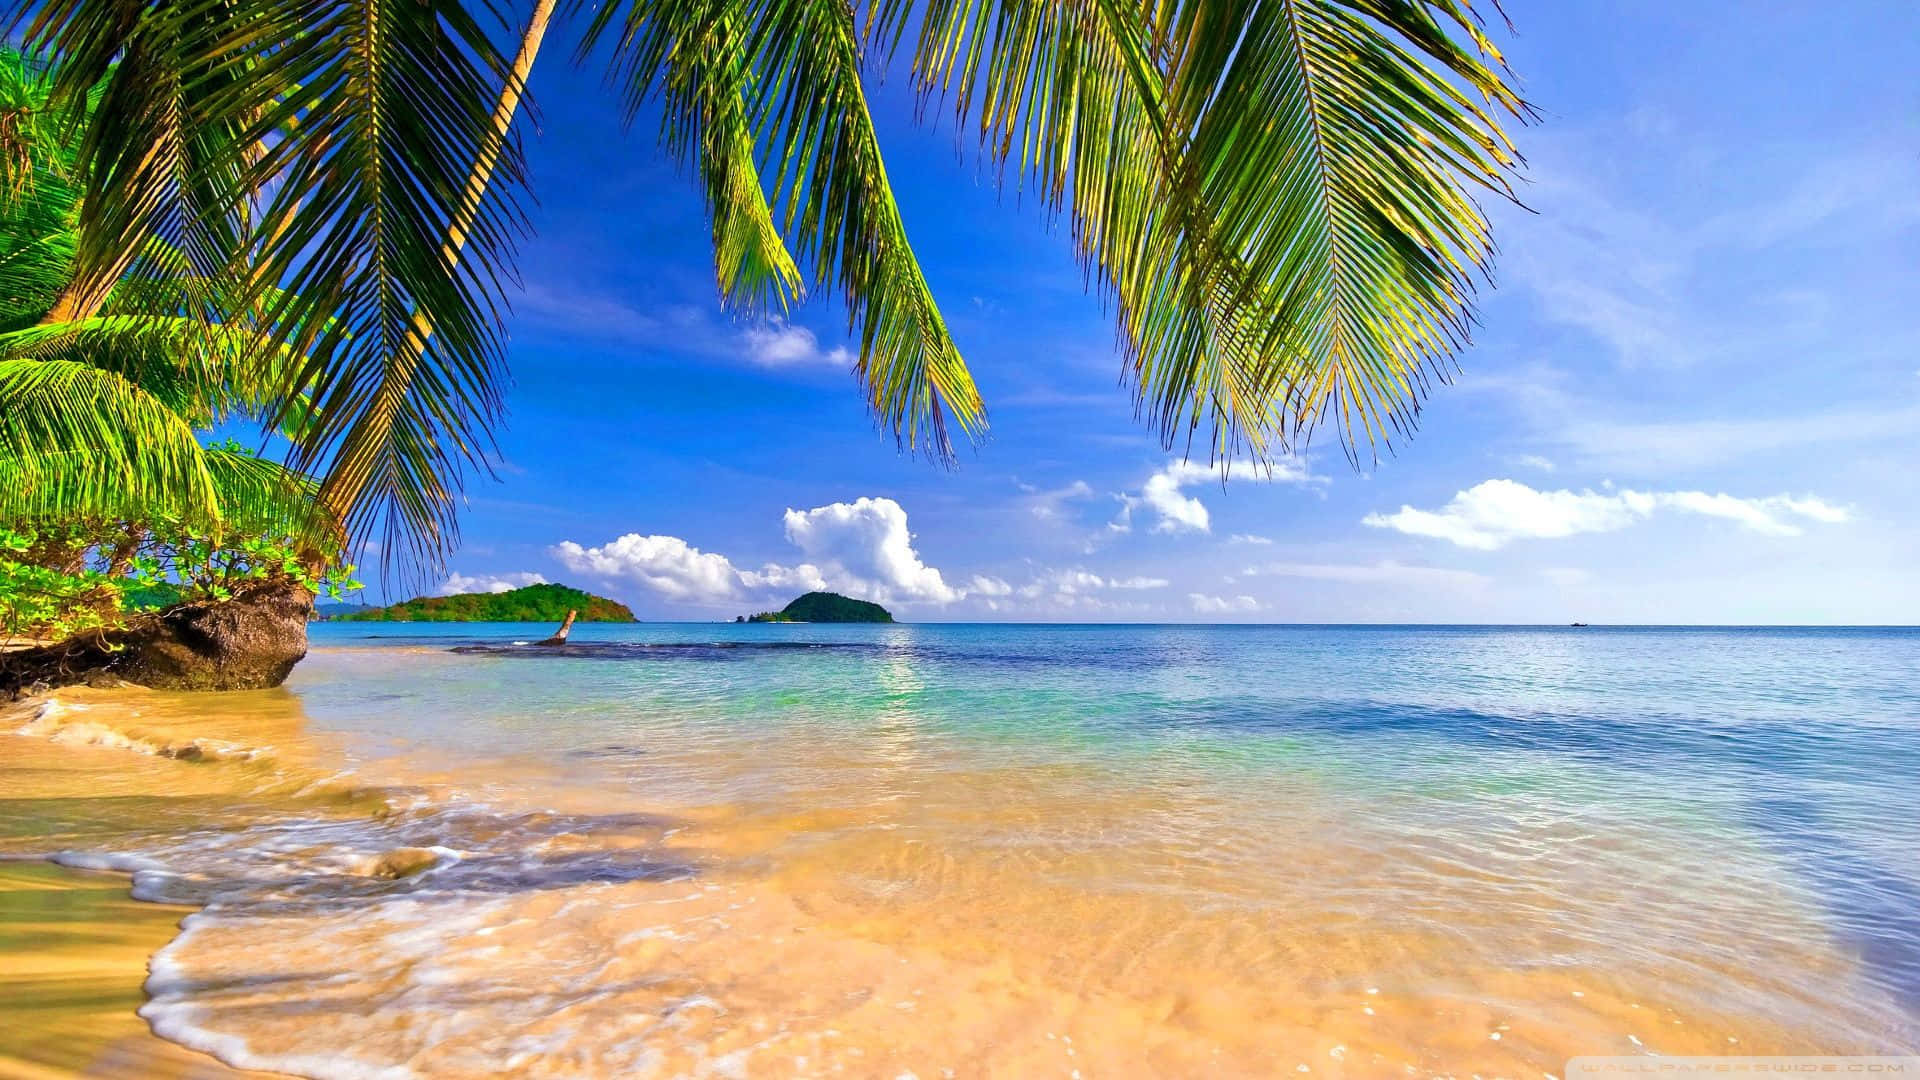 Relax and Unwind on a Beautiful Tropical Beach